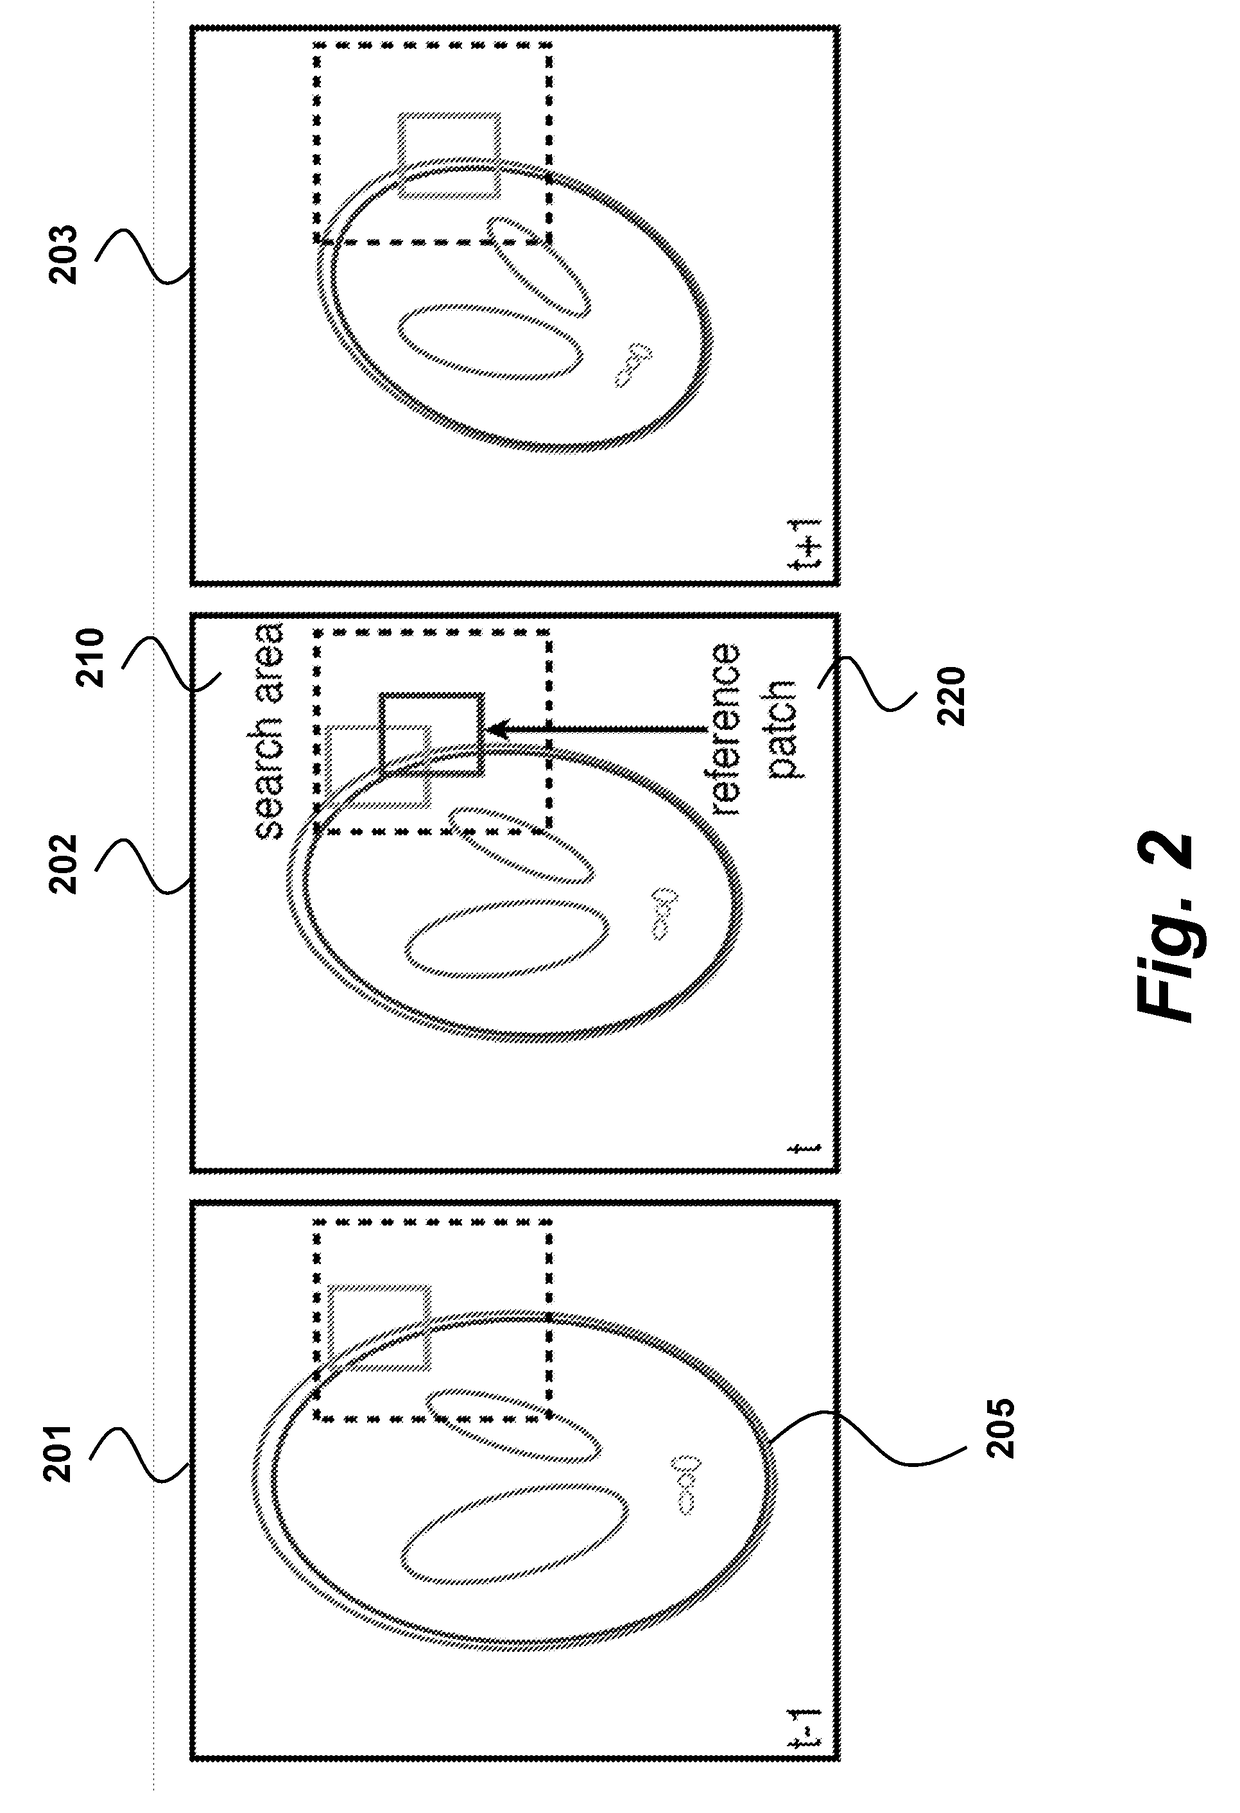 Method and System for Motion Adaptive Fusion of Optical Images and Depth Maps Acquired by Cameras and Depth Sensors